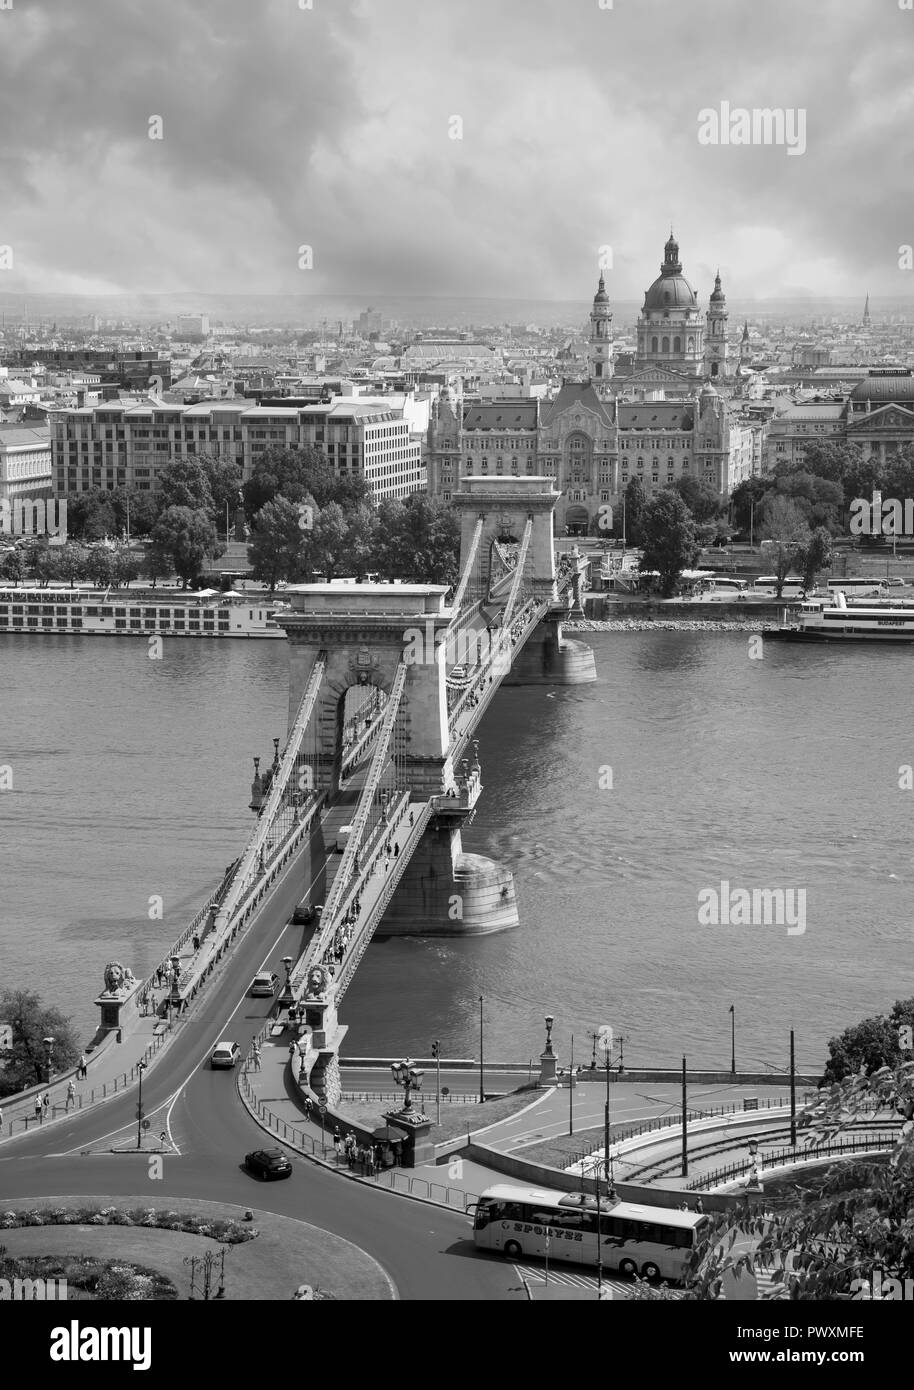 Budapest, Hungary - 3 august, 2018: aerial view of the Chain Bridge in black and white Stock Photo